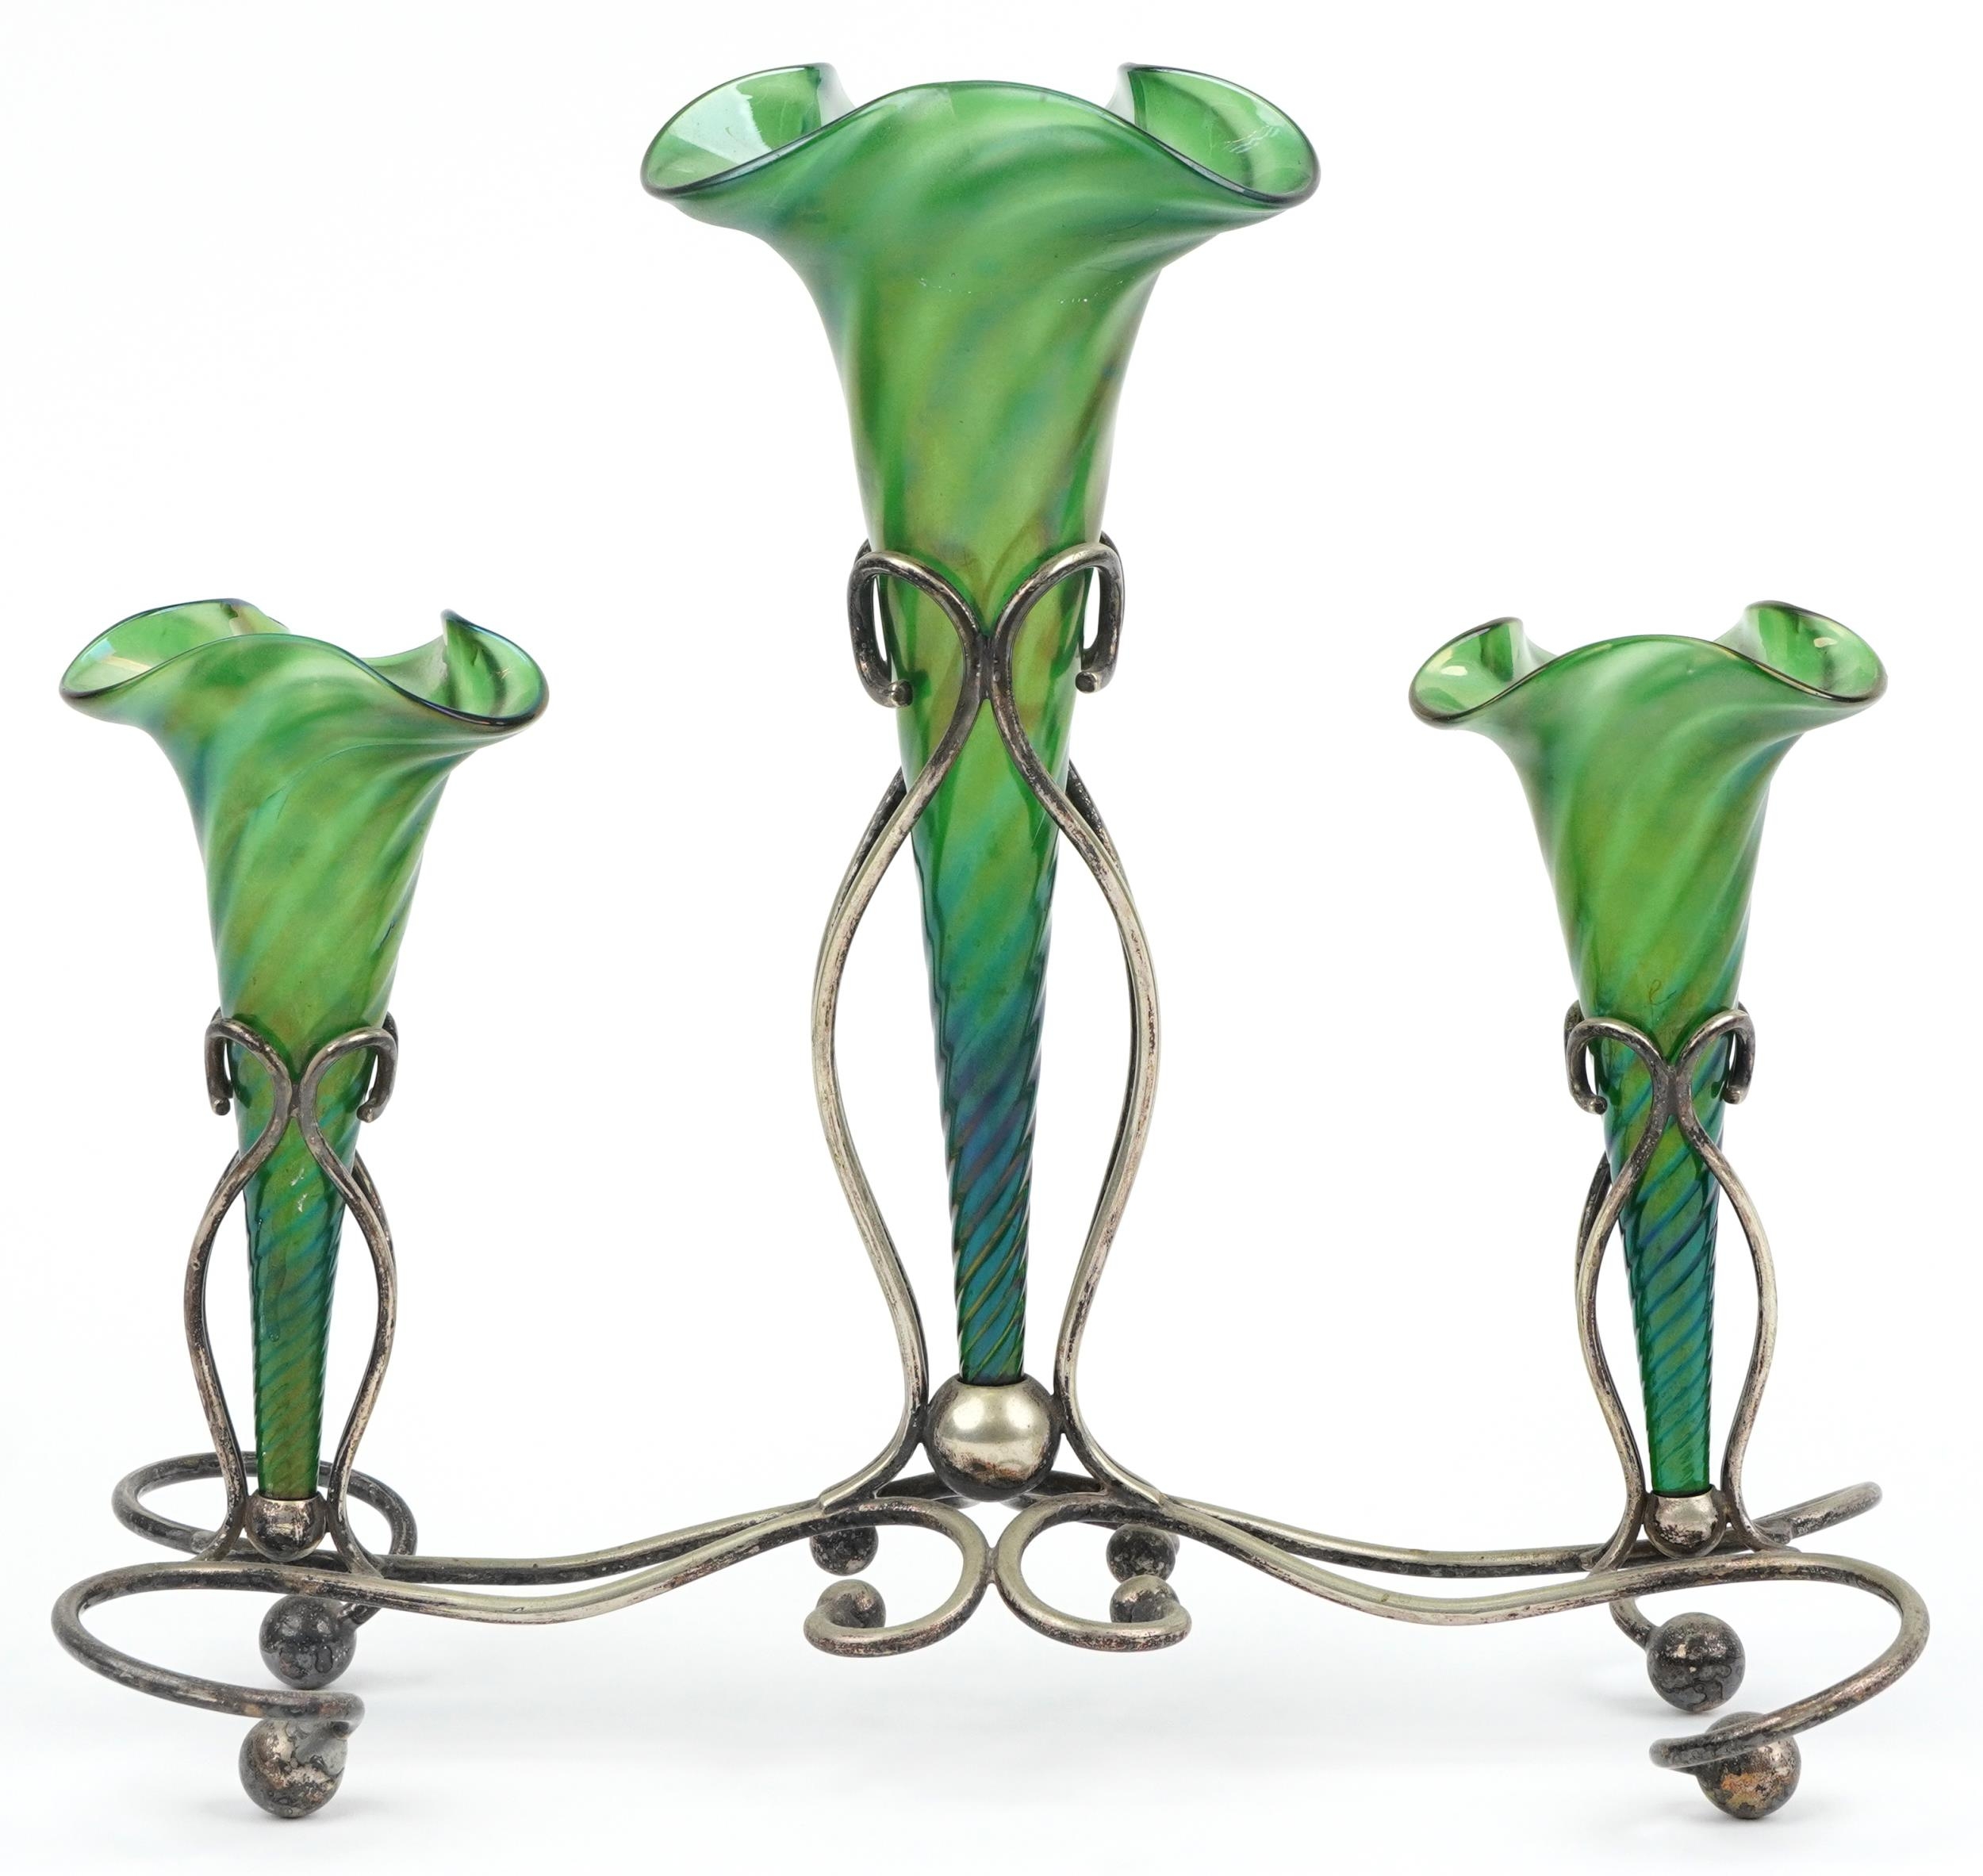 Art Nouveau silver plated three branch epergne stand with three iridescent green glass liners, - Image 2 of 3